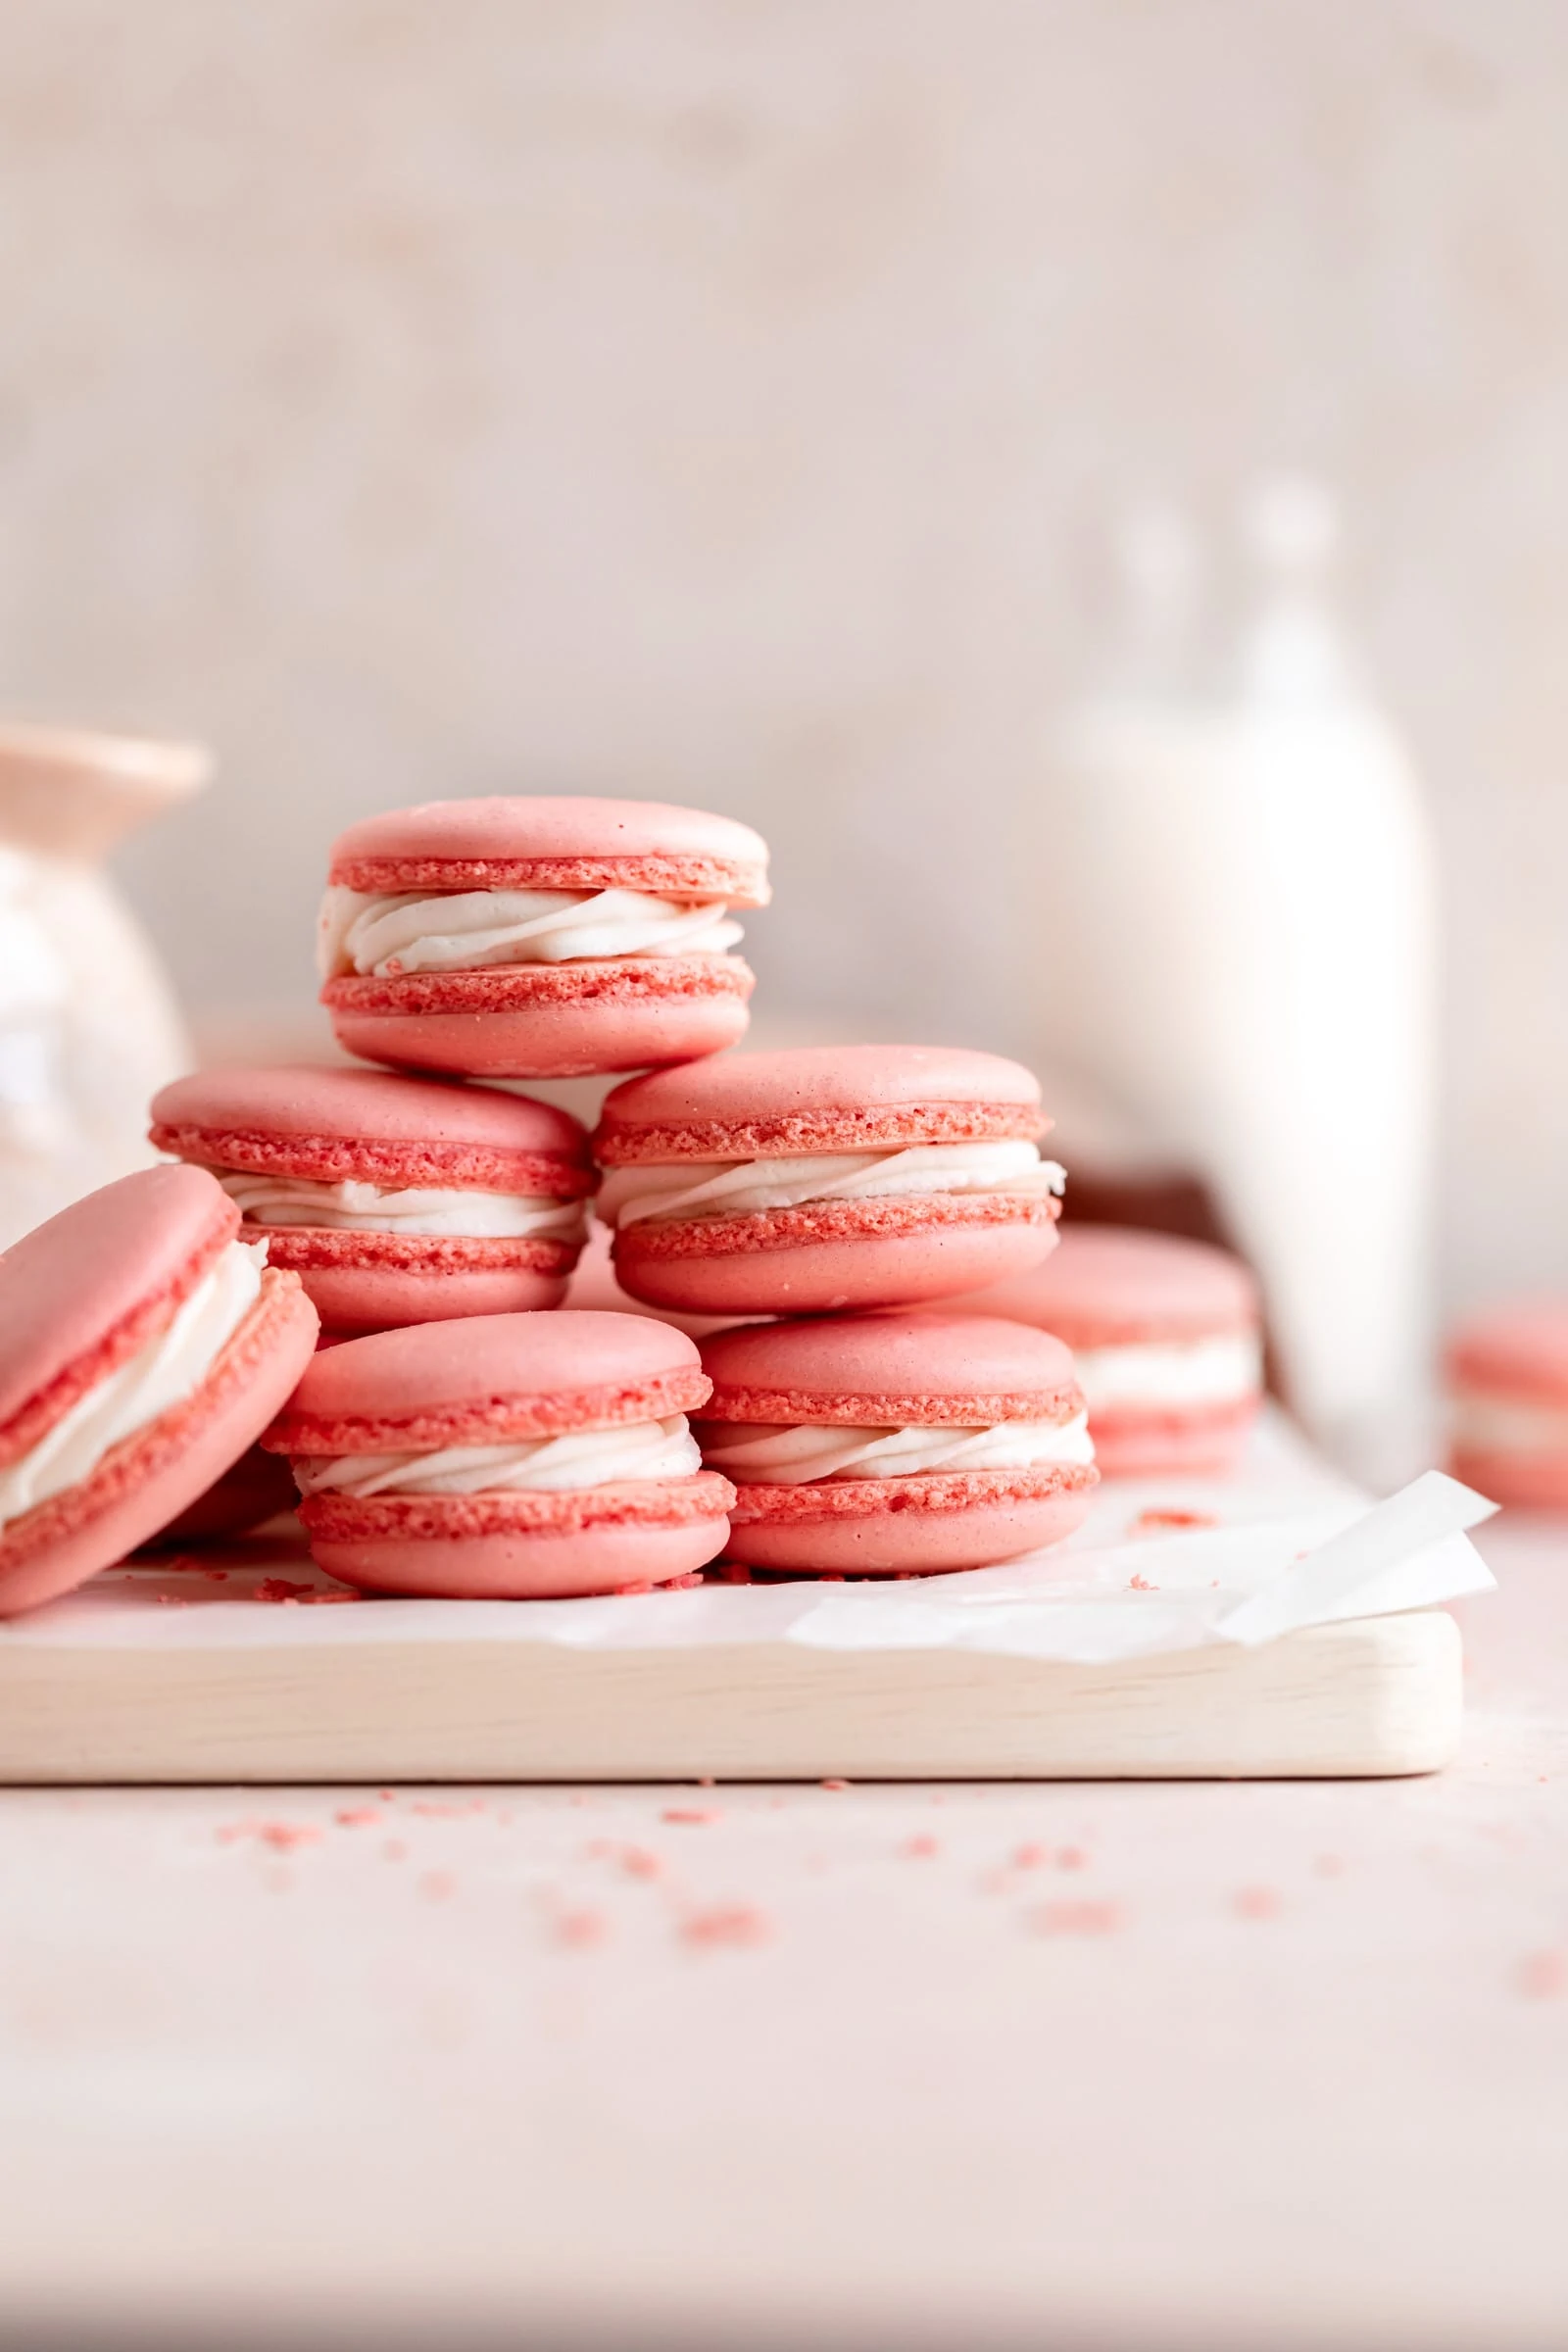 Foolproof Macaron Recipe (Step by Step!) to make french macarons!